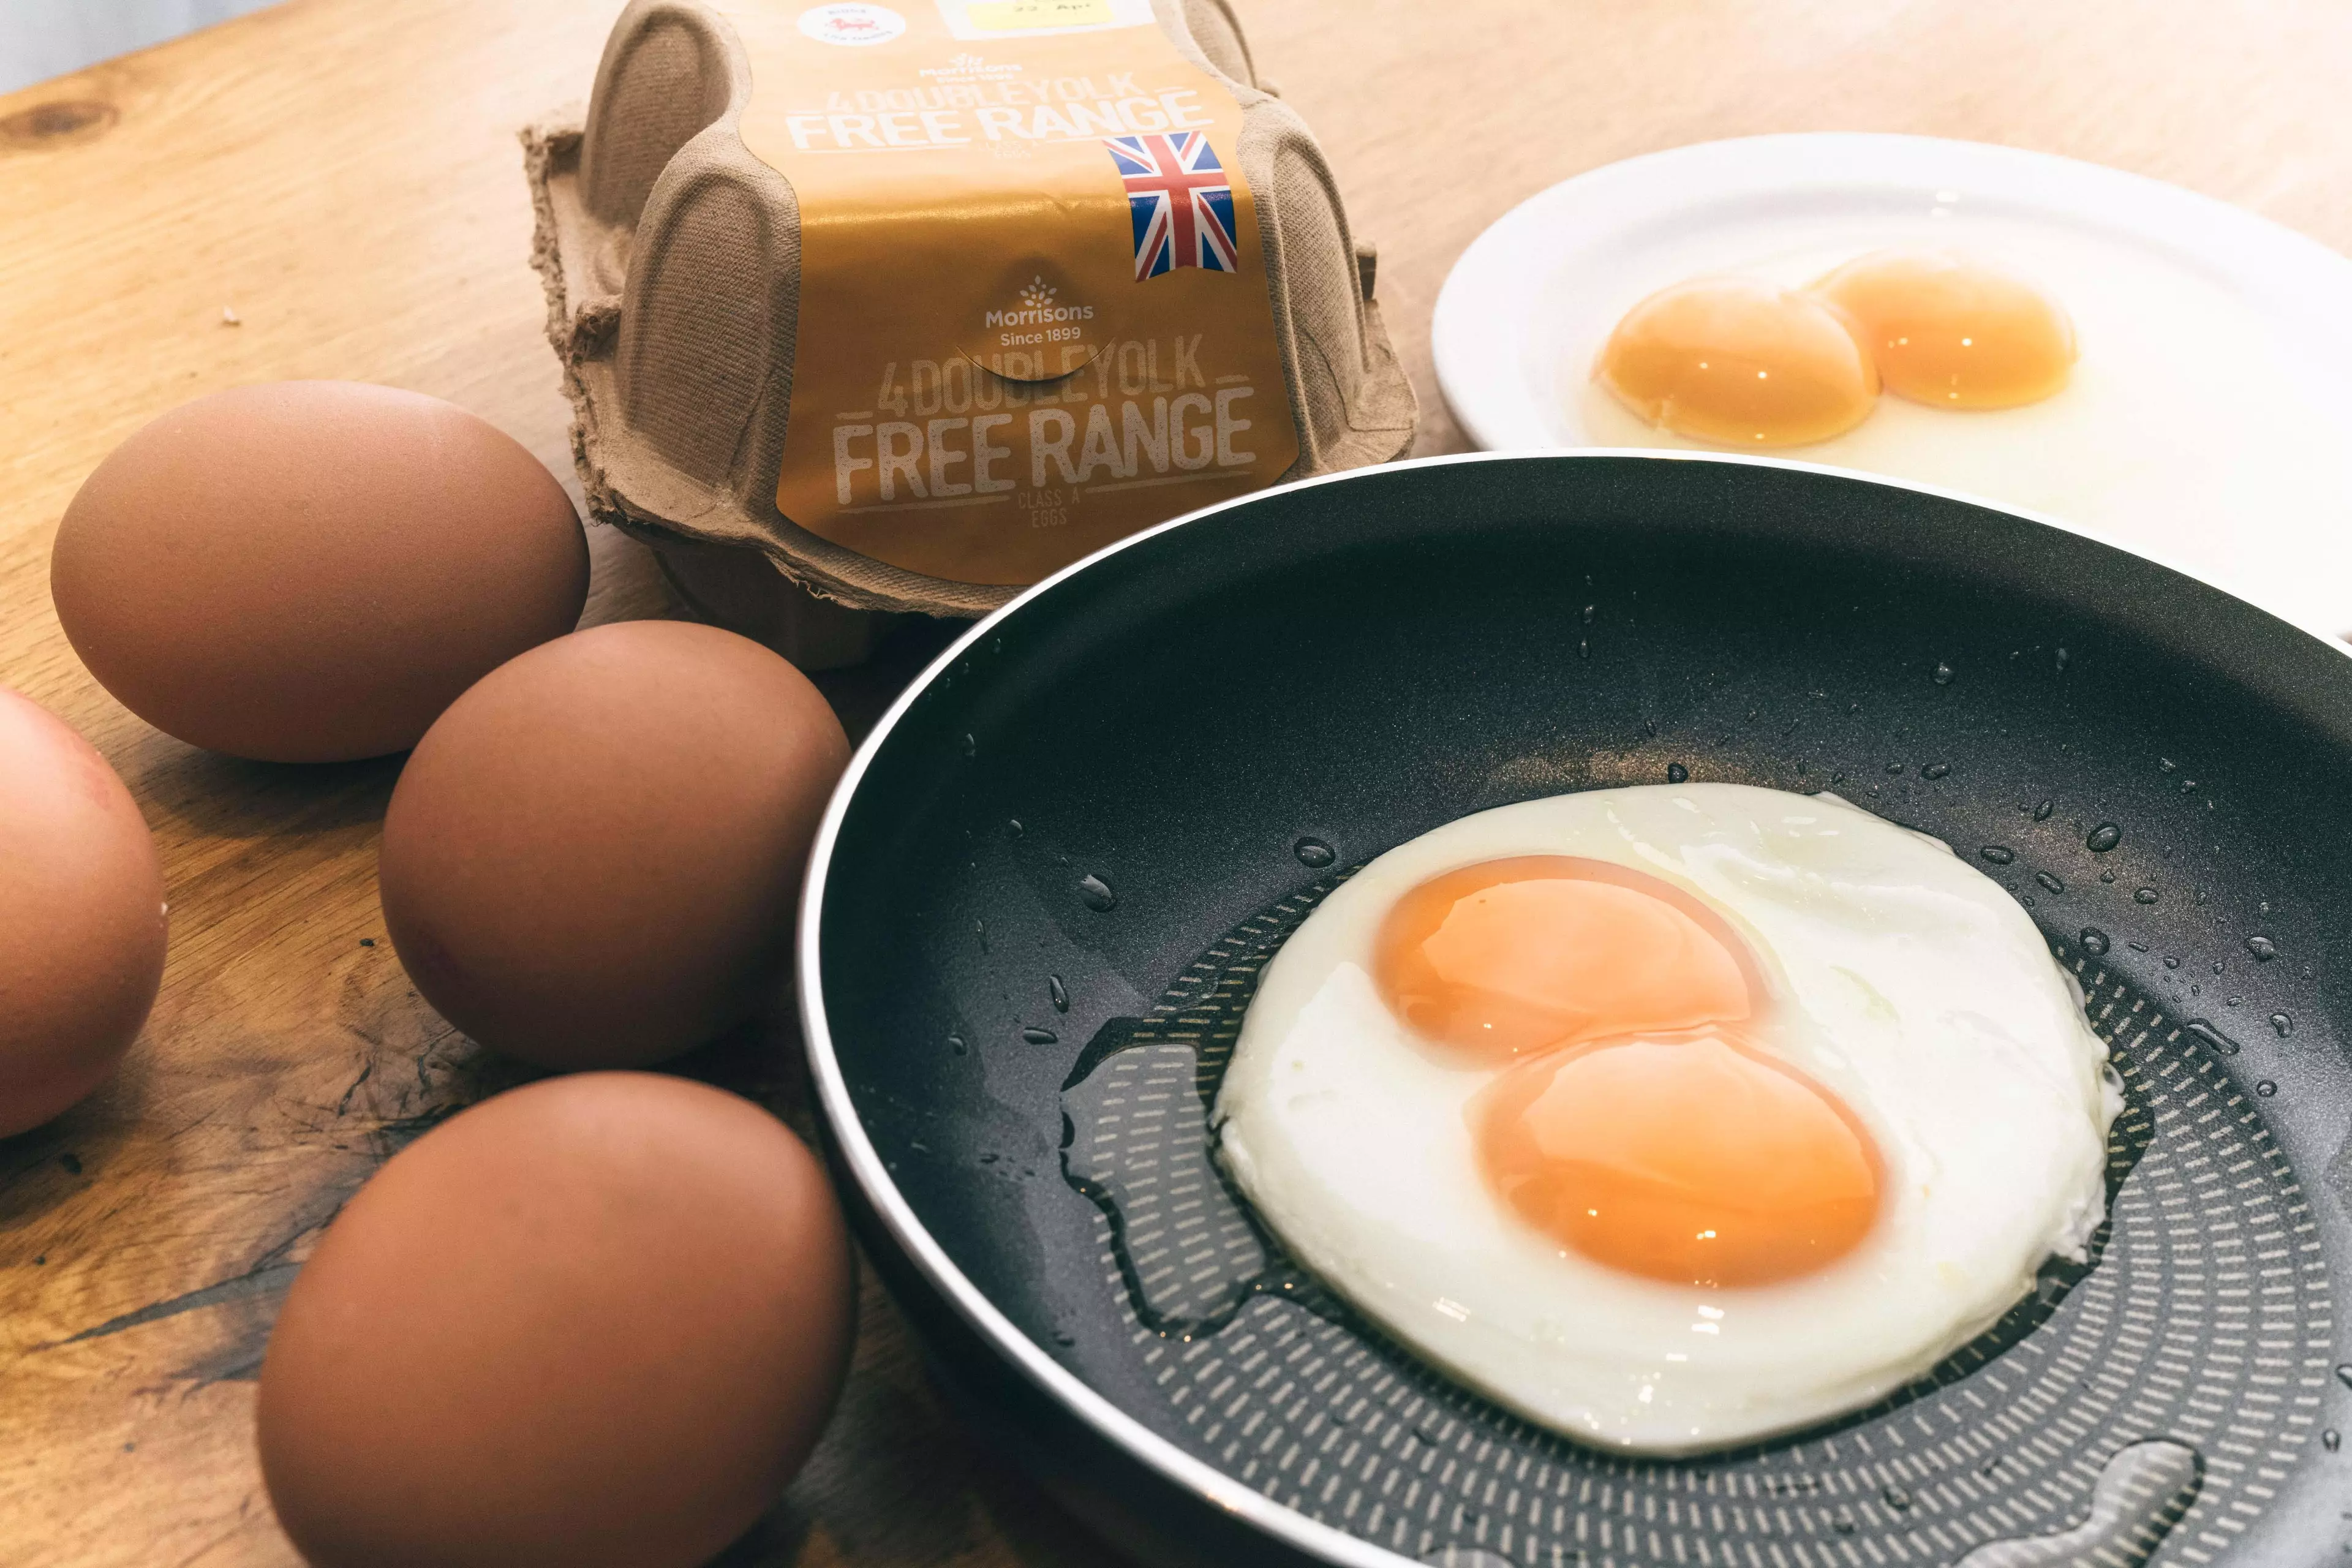 Eggs are officially the favoured breakfast snack